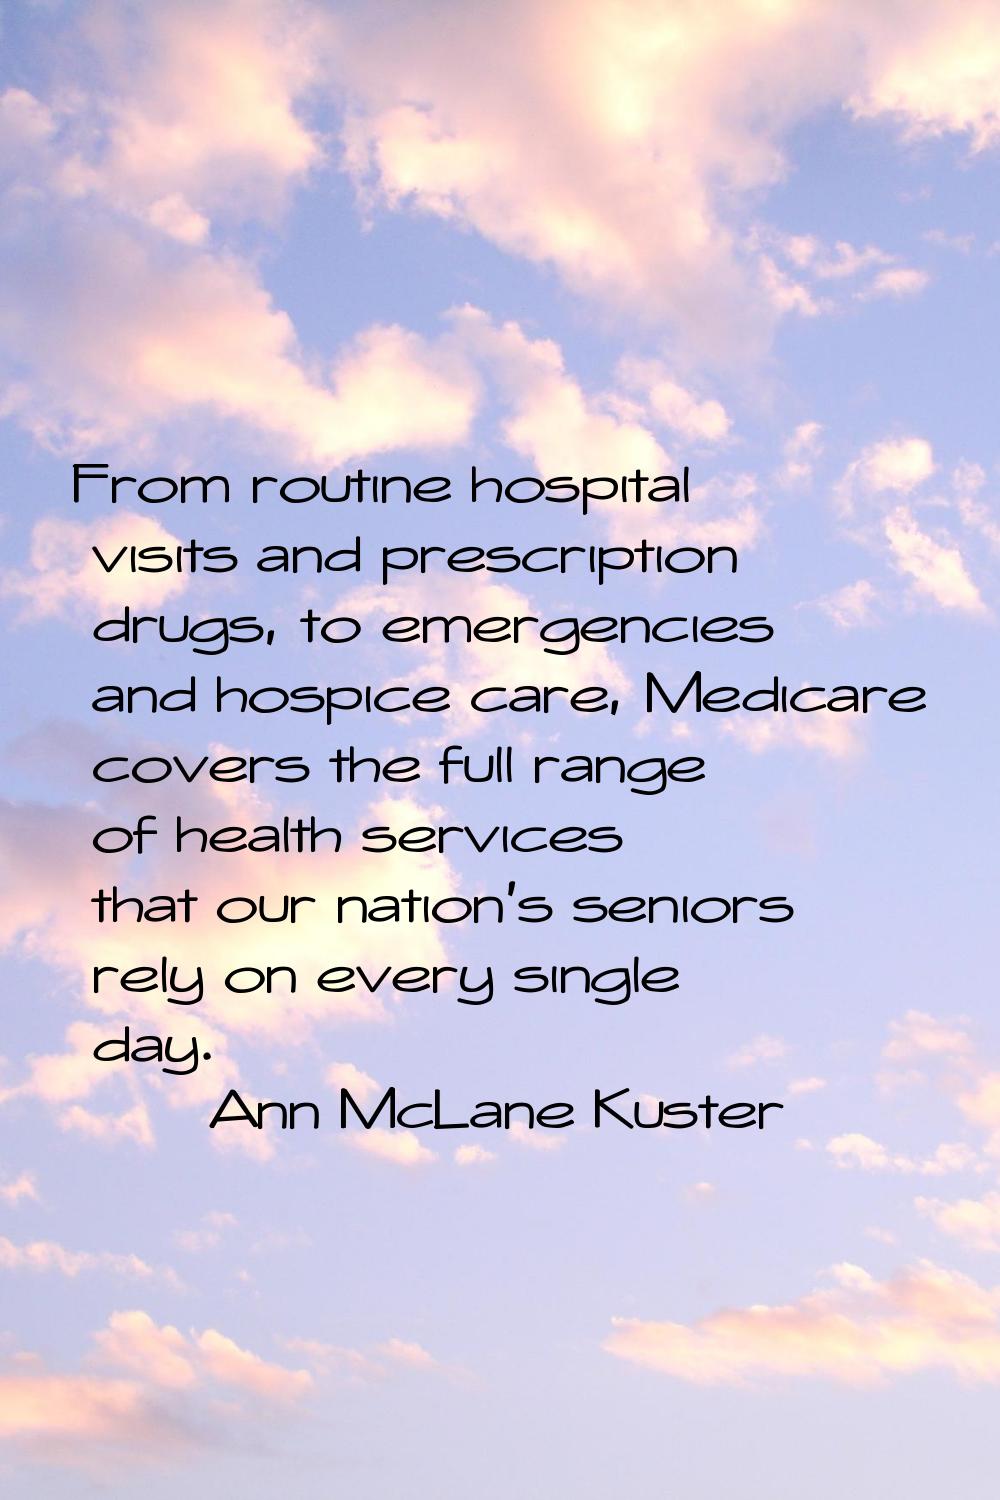 From routine hospital visits and prescription drugs, to emergencies and hospice care, Medicare cove